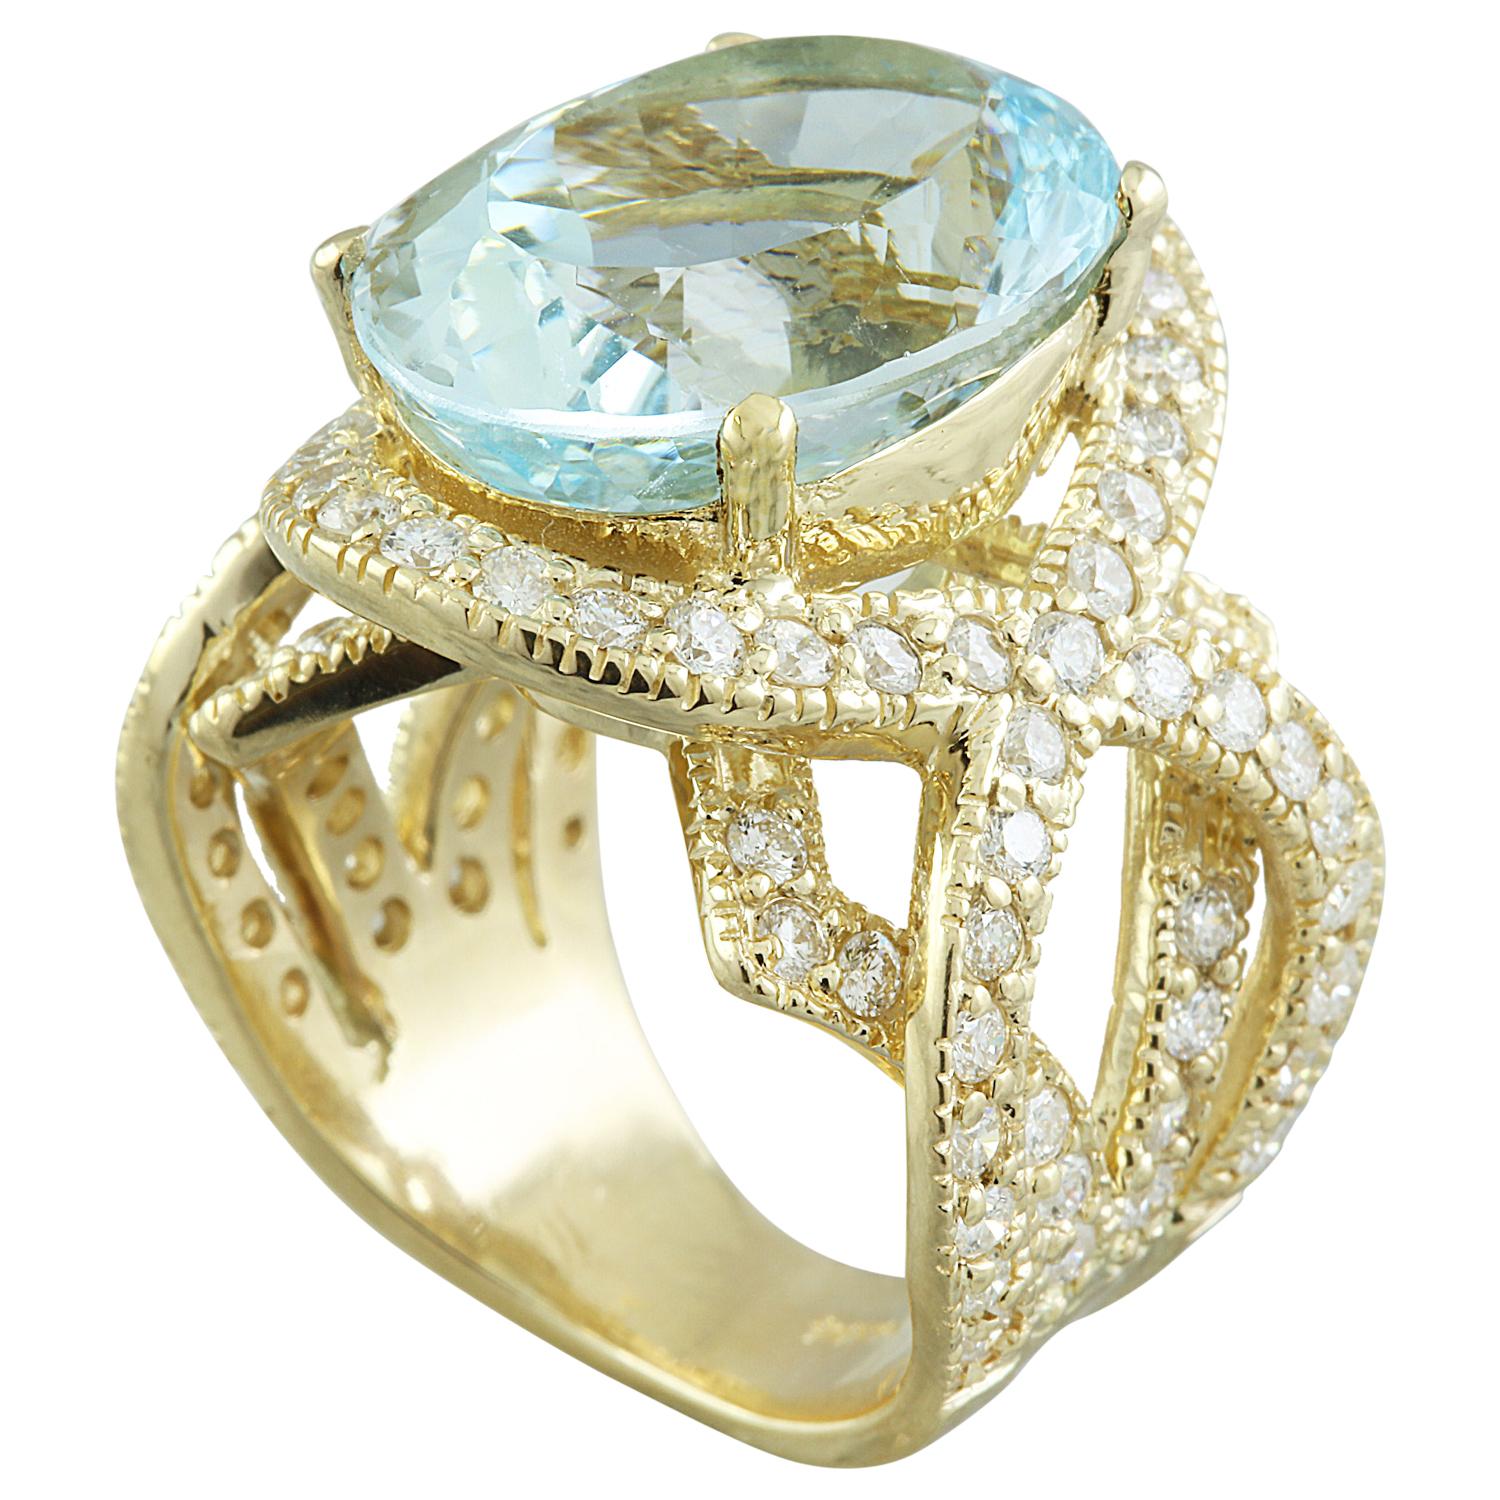 Oval Cut Natural Aquamarine Diamond Ring In 14 Karat Yellow Gold For Sale